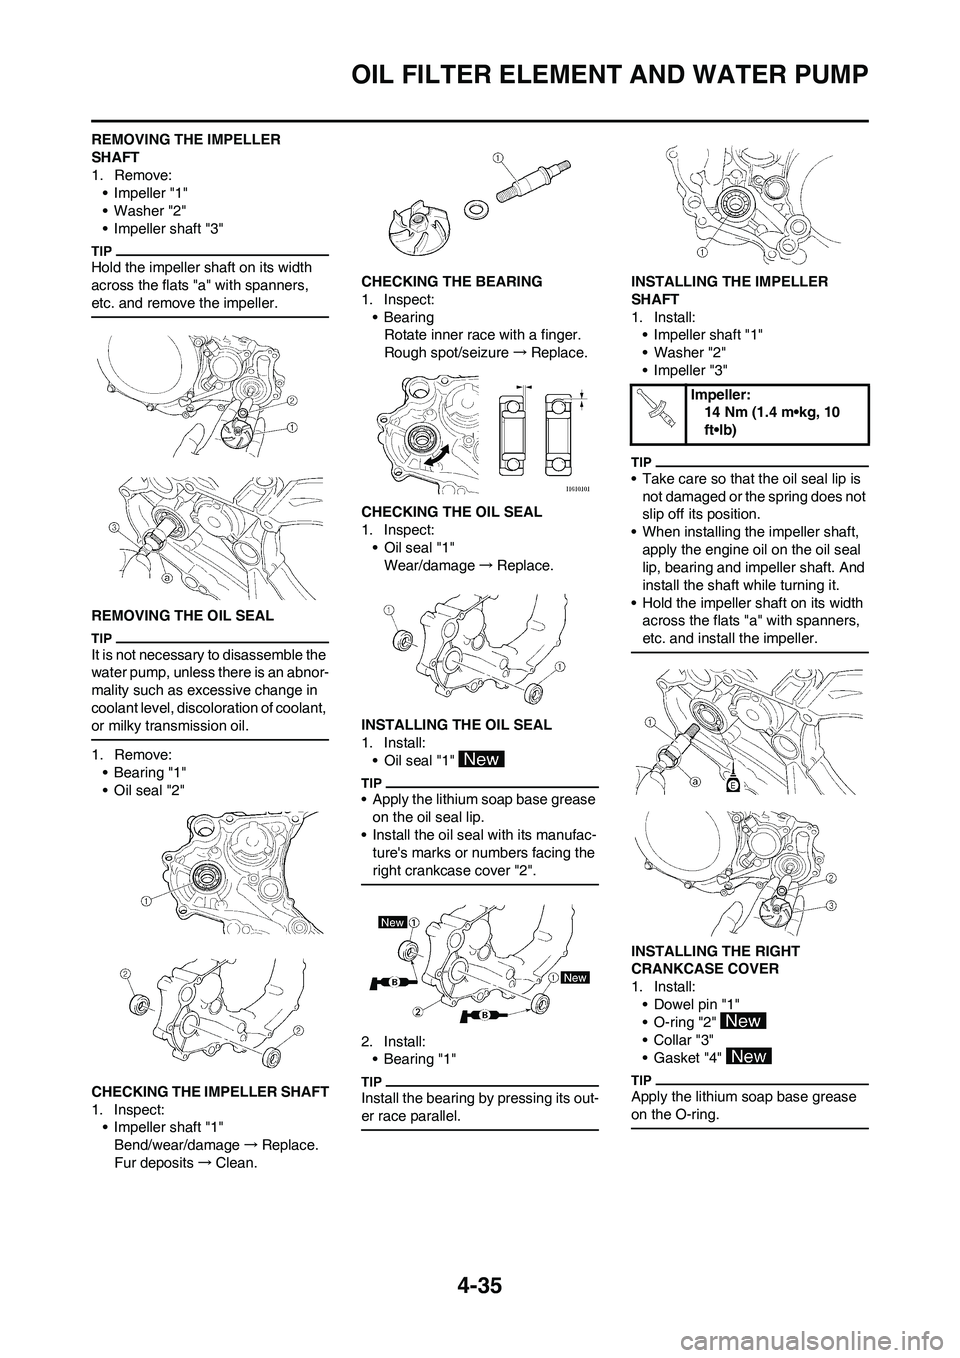 YAMAHA YZ450F 2009  Owners Manual 4-35
OIL FILTER ELEMENT AND WATER PUMP
REMOVING THE IMPELLER 
SHAFT
1. Remove:
•Impeller "1"
• Washer "2"
• Impeller shaft "3"
Hold the impeller shaft on its width 
across the flats "a" with spa